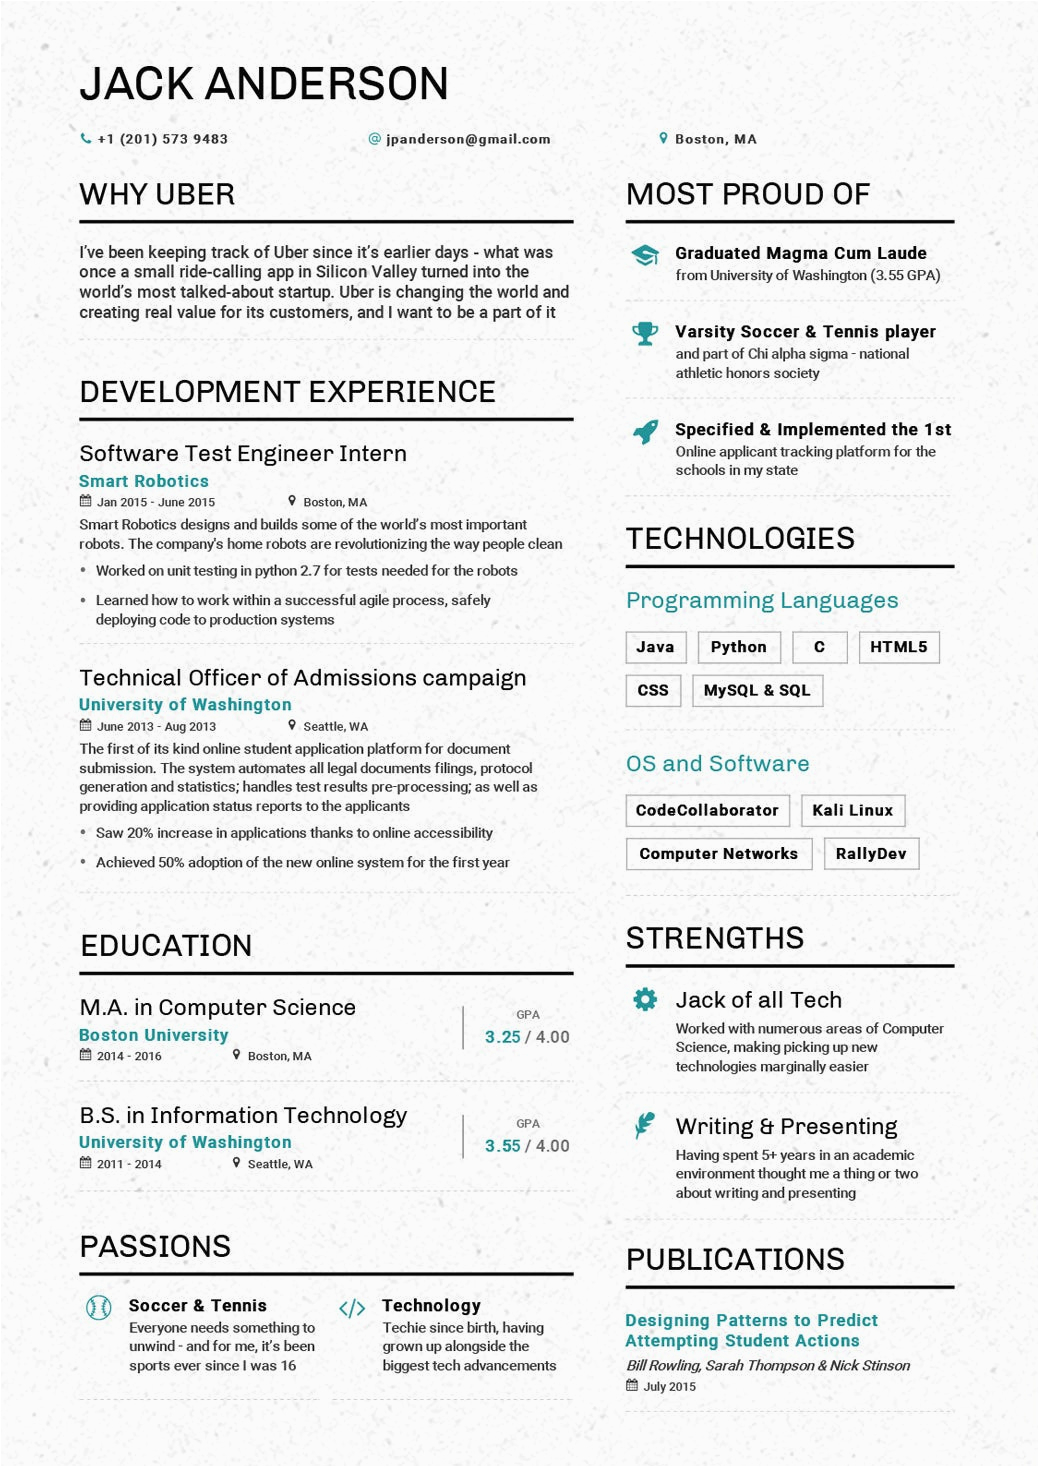 Sample Of Skills and Strengths In Resume 7 College Grad Resume Mistakes Business Insider